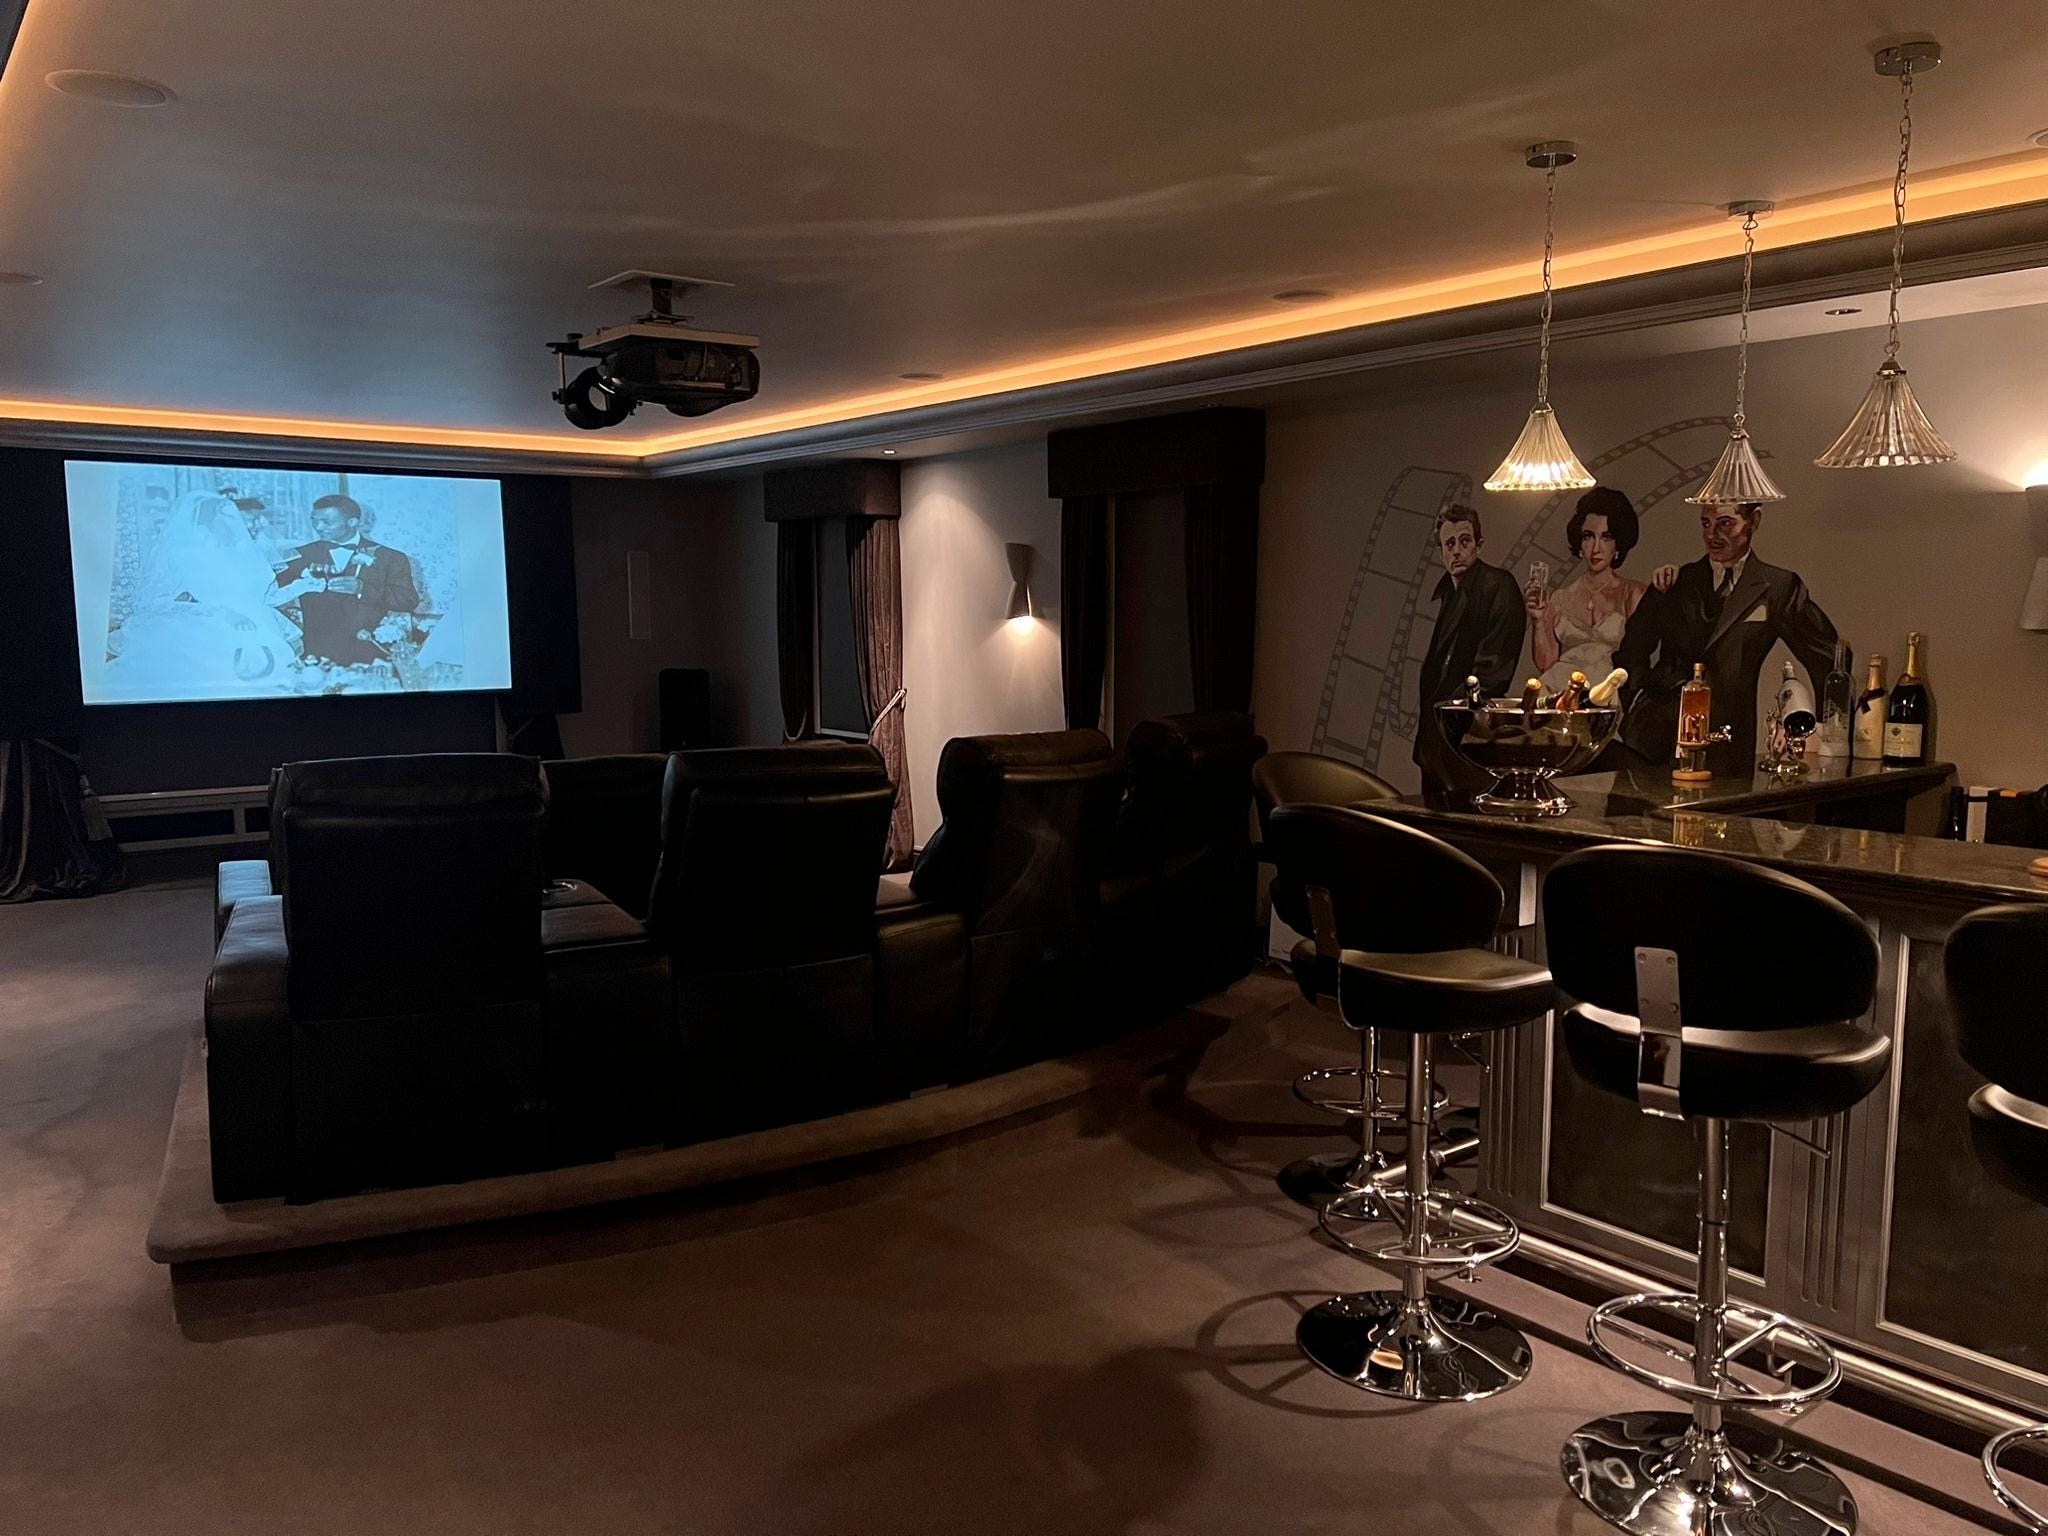 a cinema in someone's house